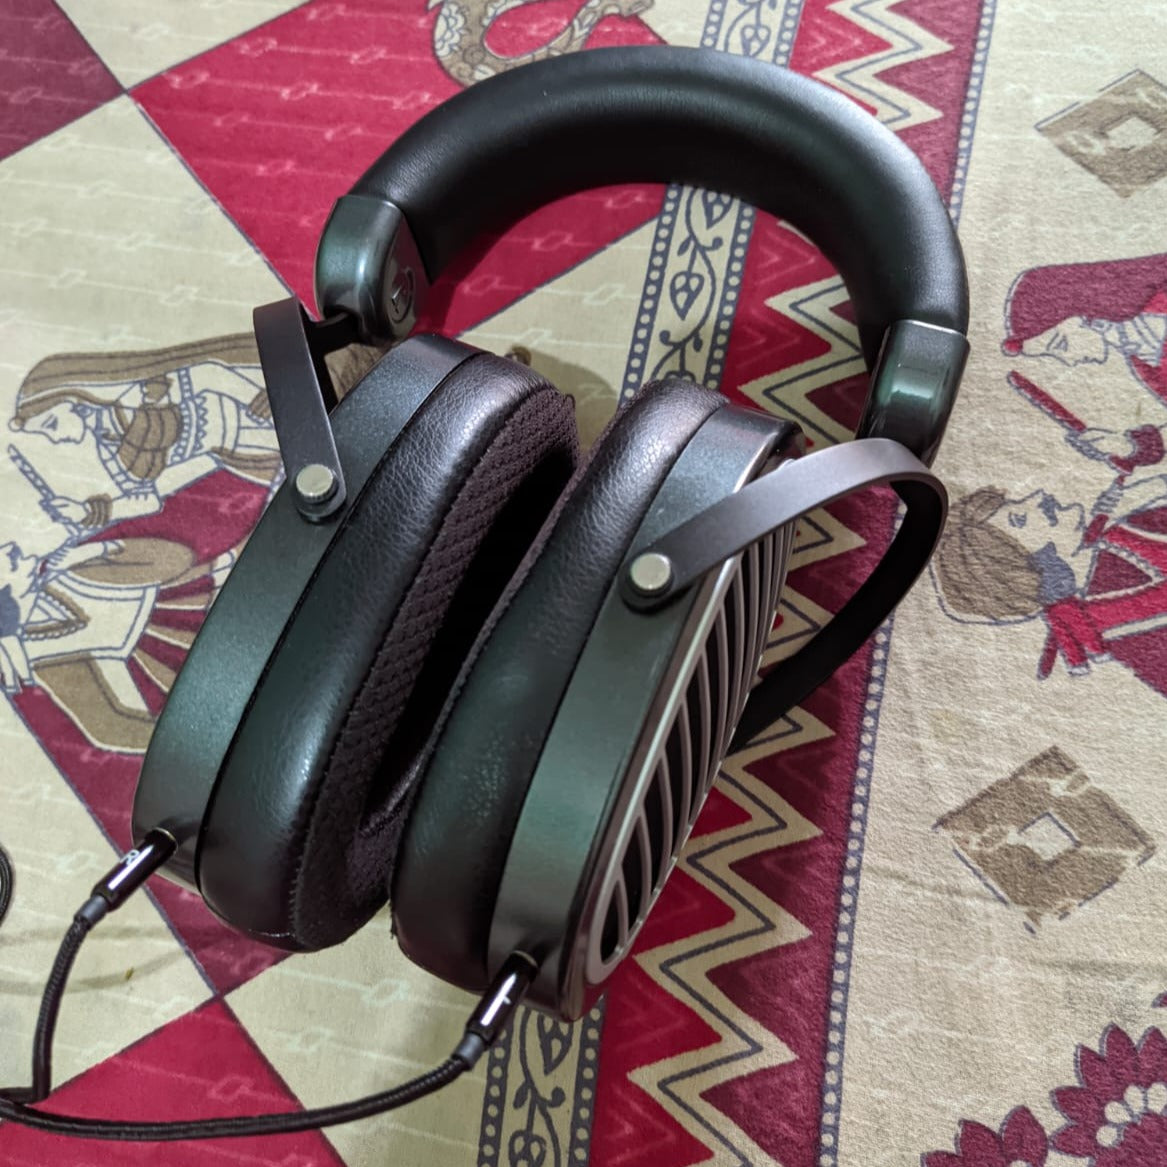 HiFiMAN - Edition XS (Pre-Owned)